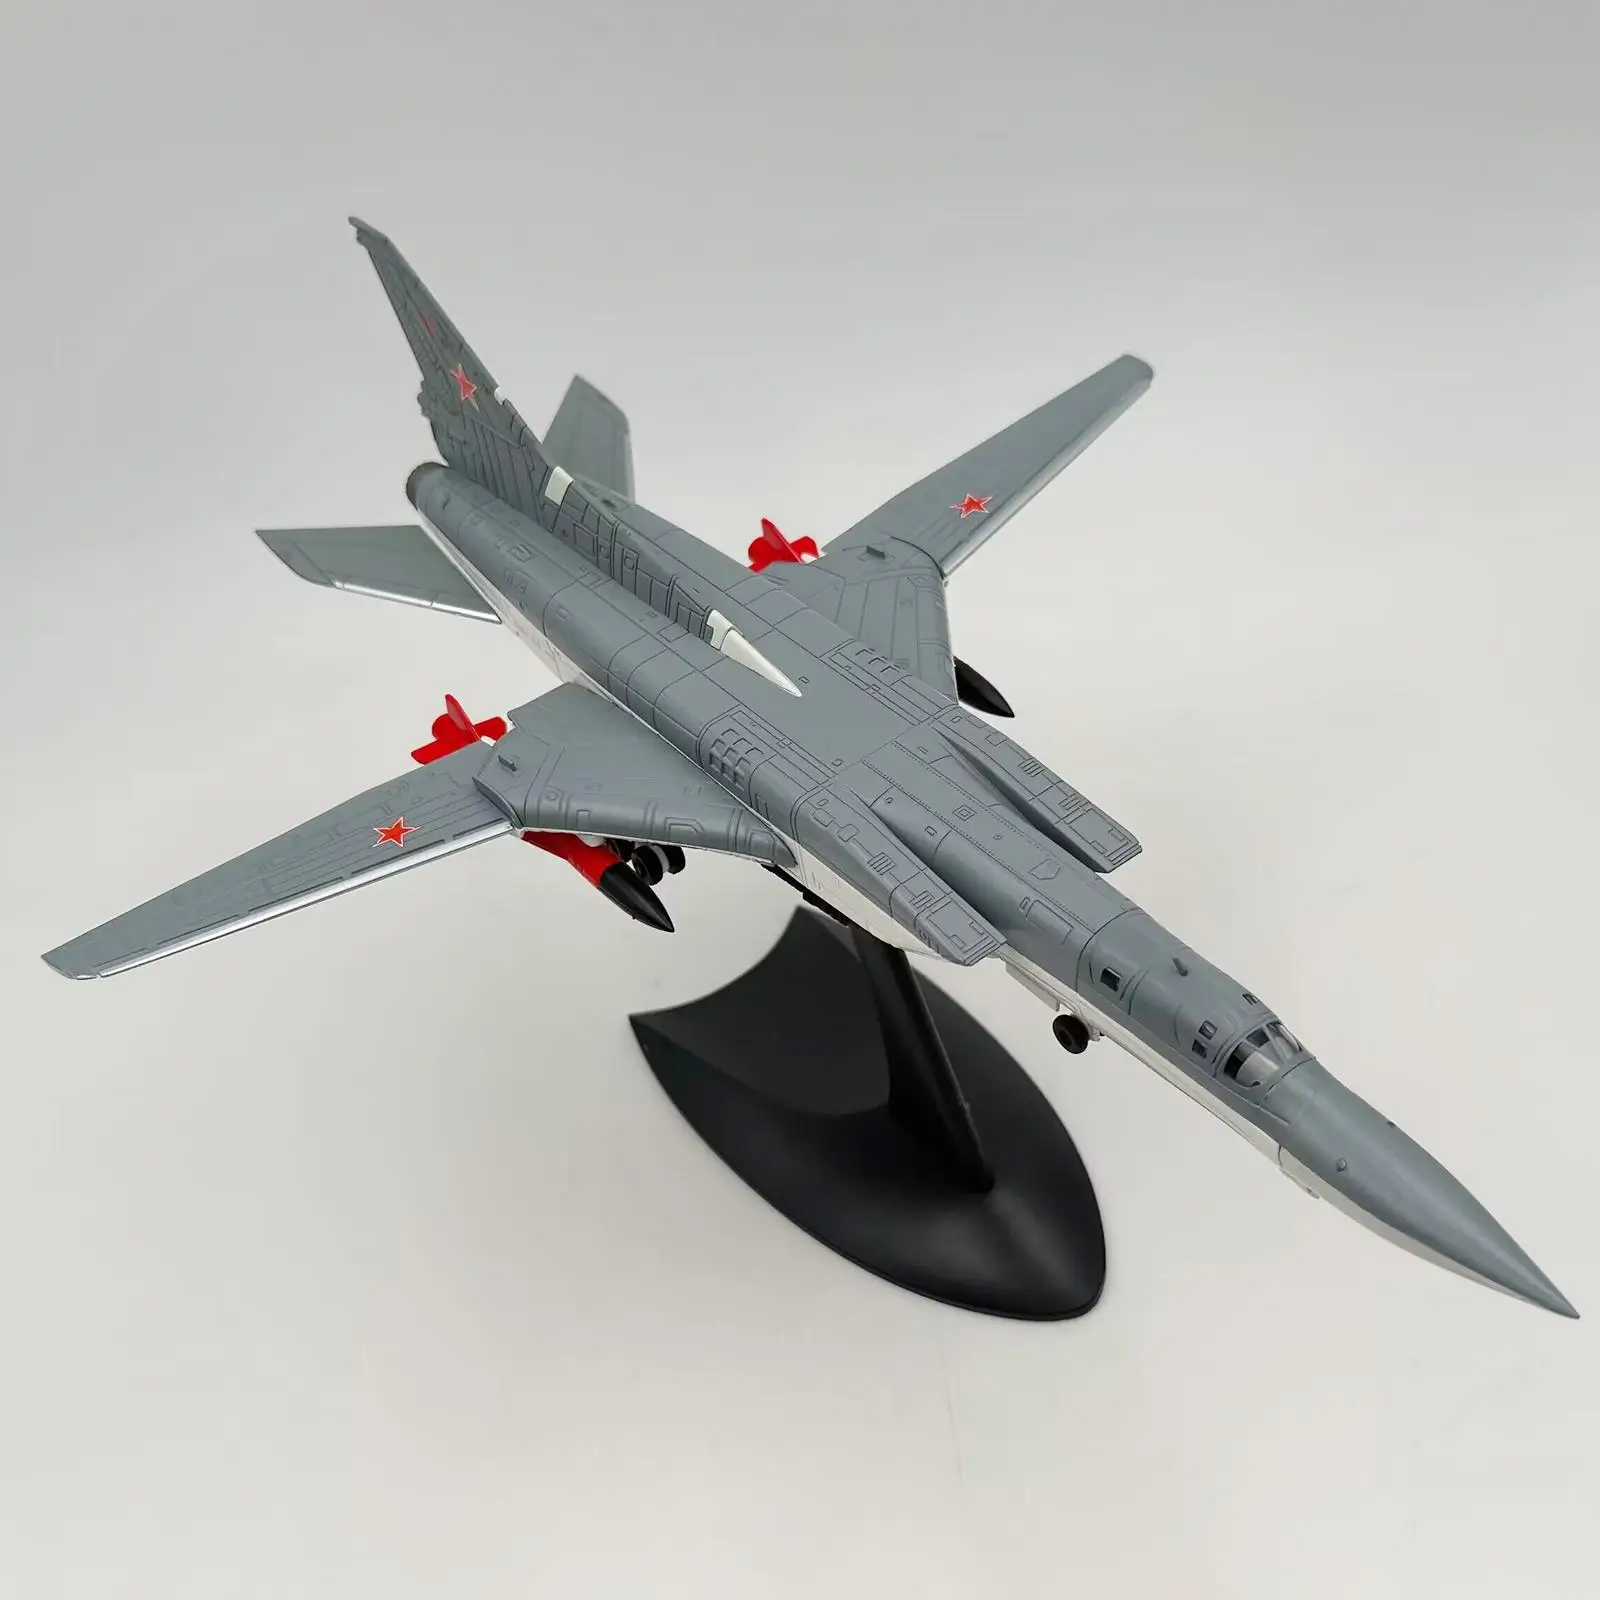 

1/144 Fighter Soviet Union/Russia Tu-22M3 Backfire Bomber Variable-sweep Wing Fighter Model Aircraft Tabletop Decor Gift Toys